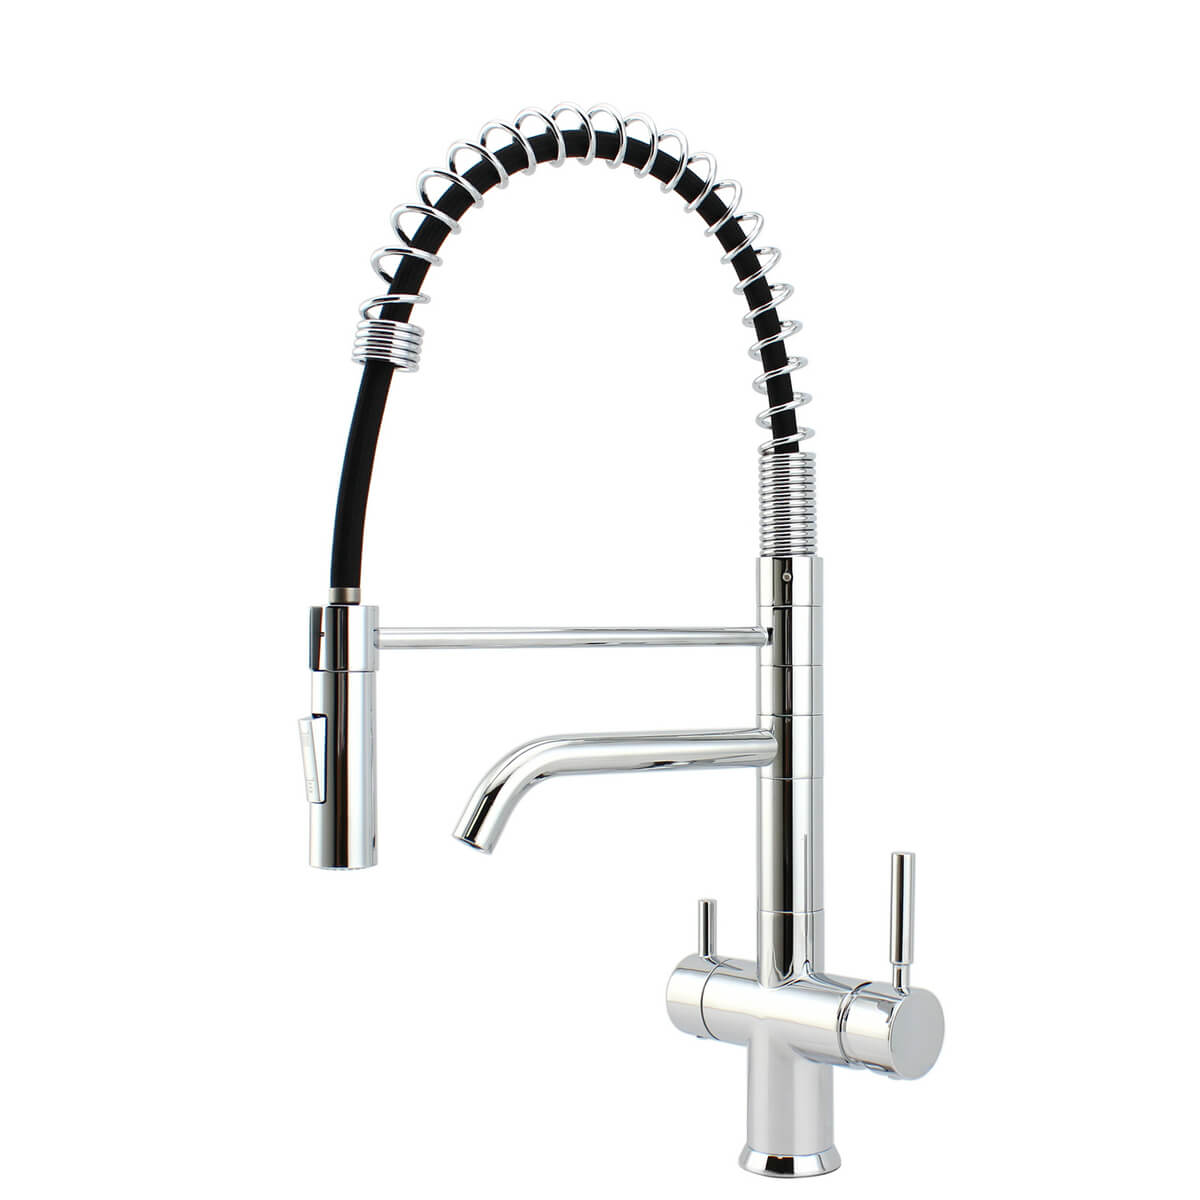 DOGO Pull Down <a href=https://www.dogofaucet.com/3-Way-Kitchen-Tap.html target='_blank'>3 way tap</a>